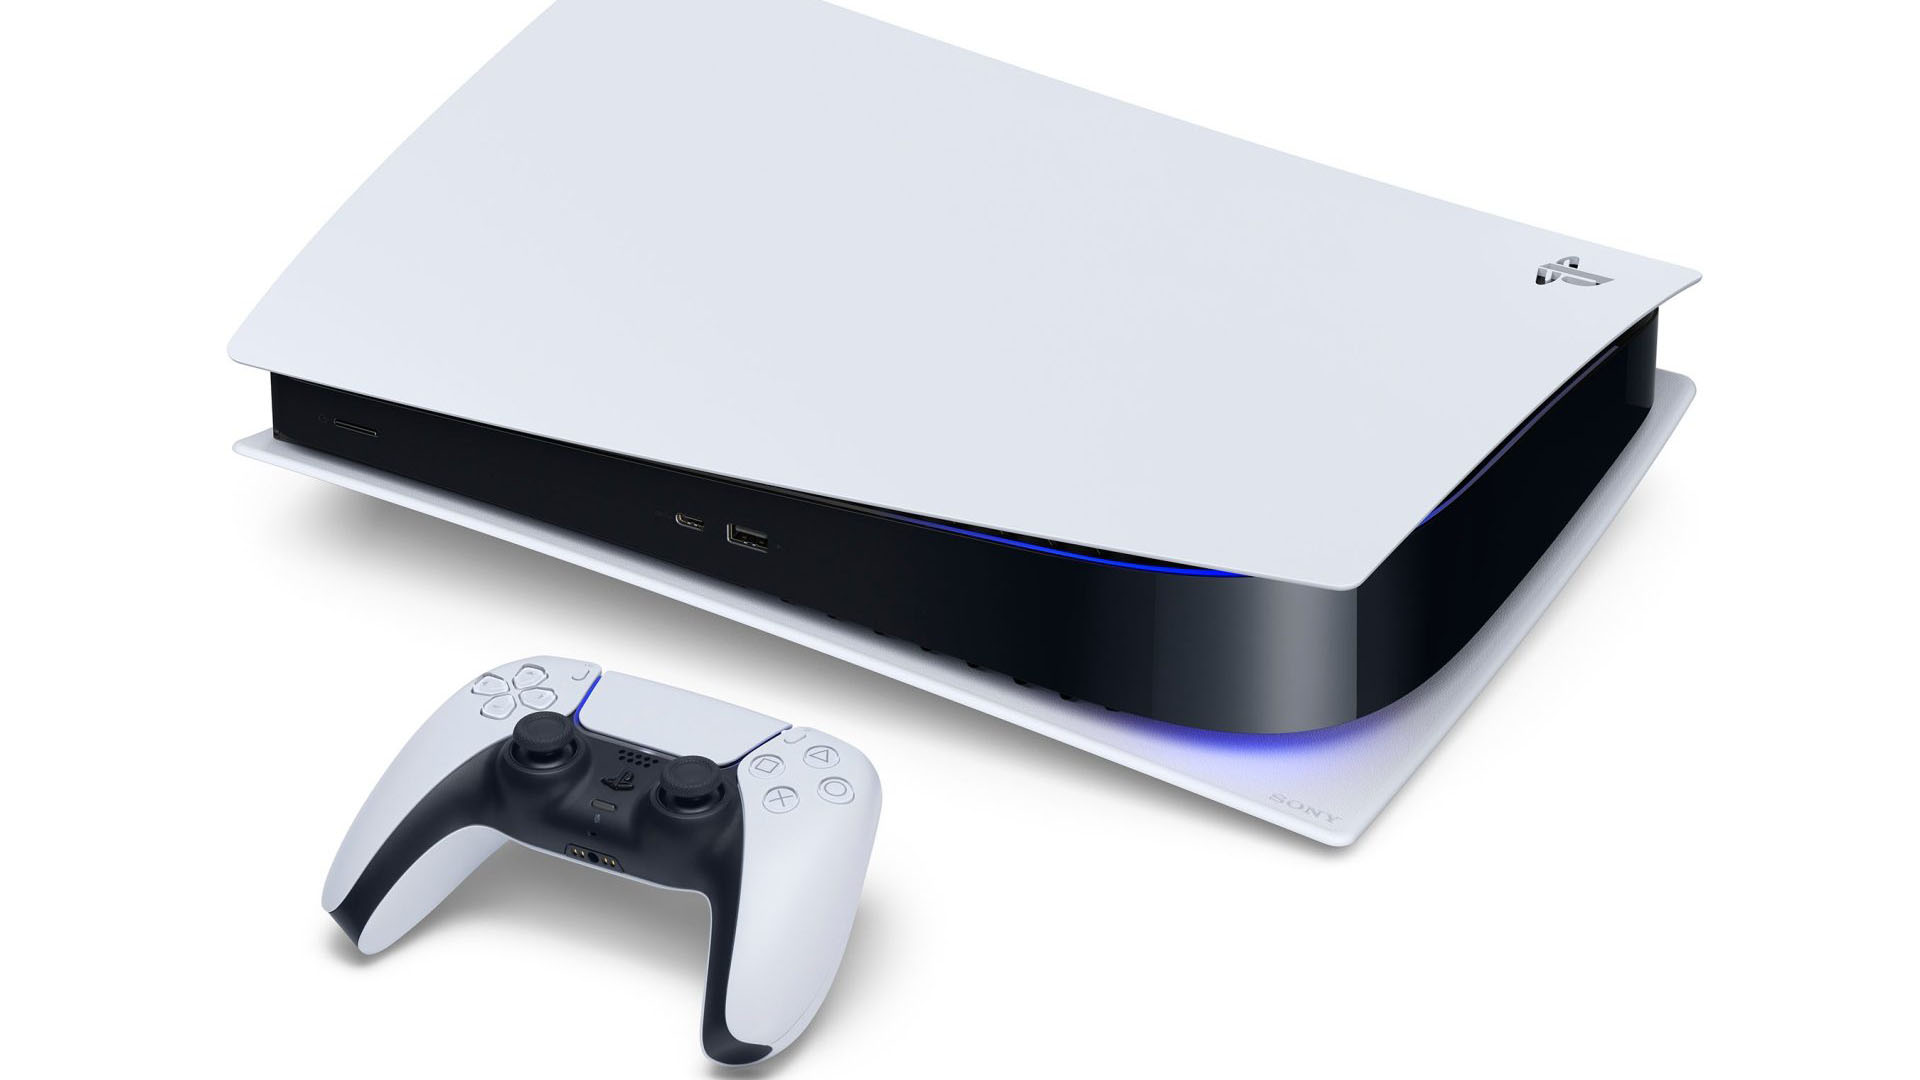 Rumor: New PS5 model will begin production in April, optional disc drive